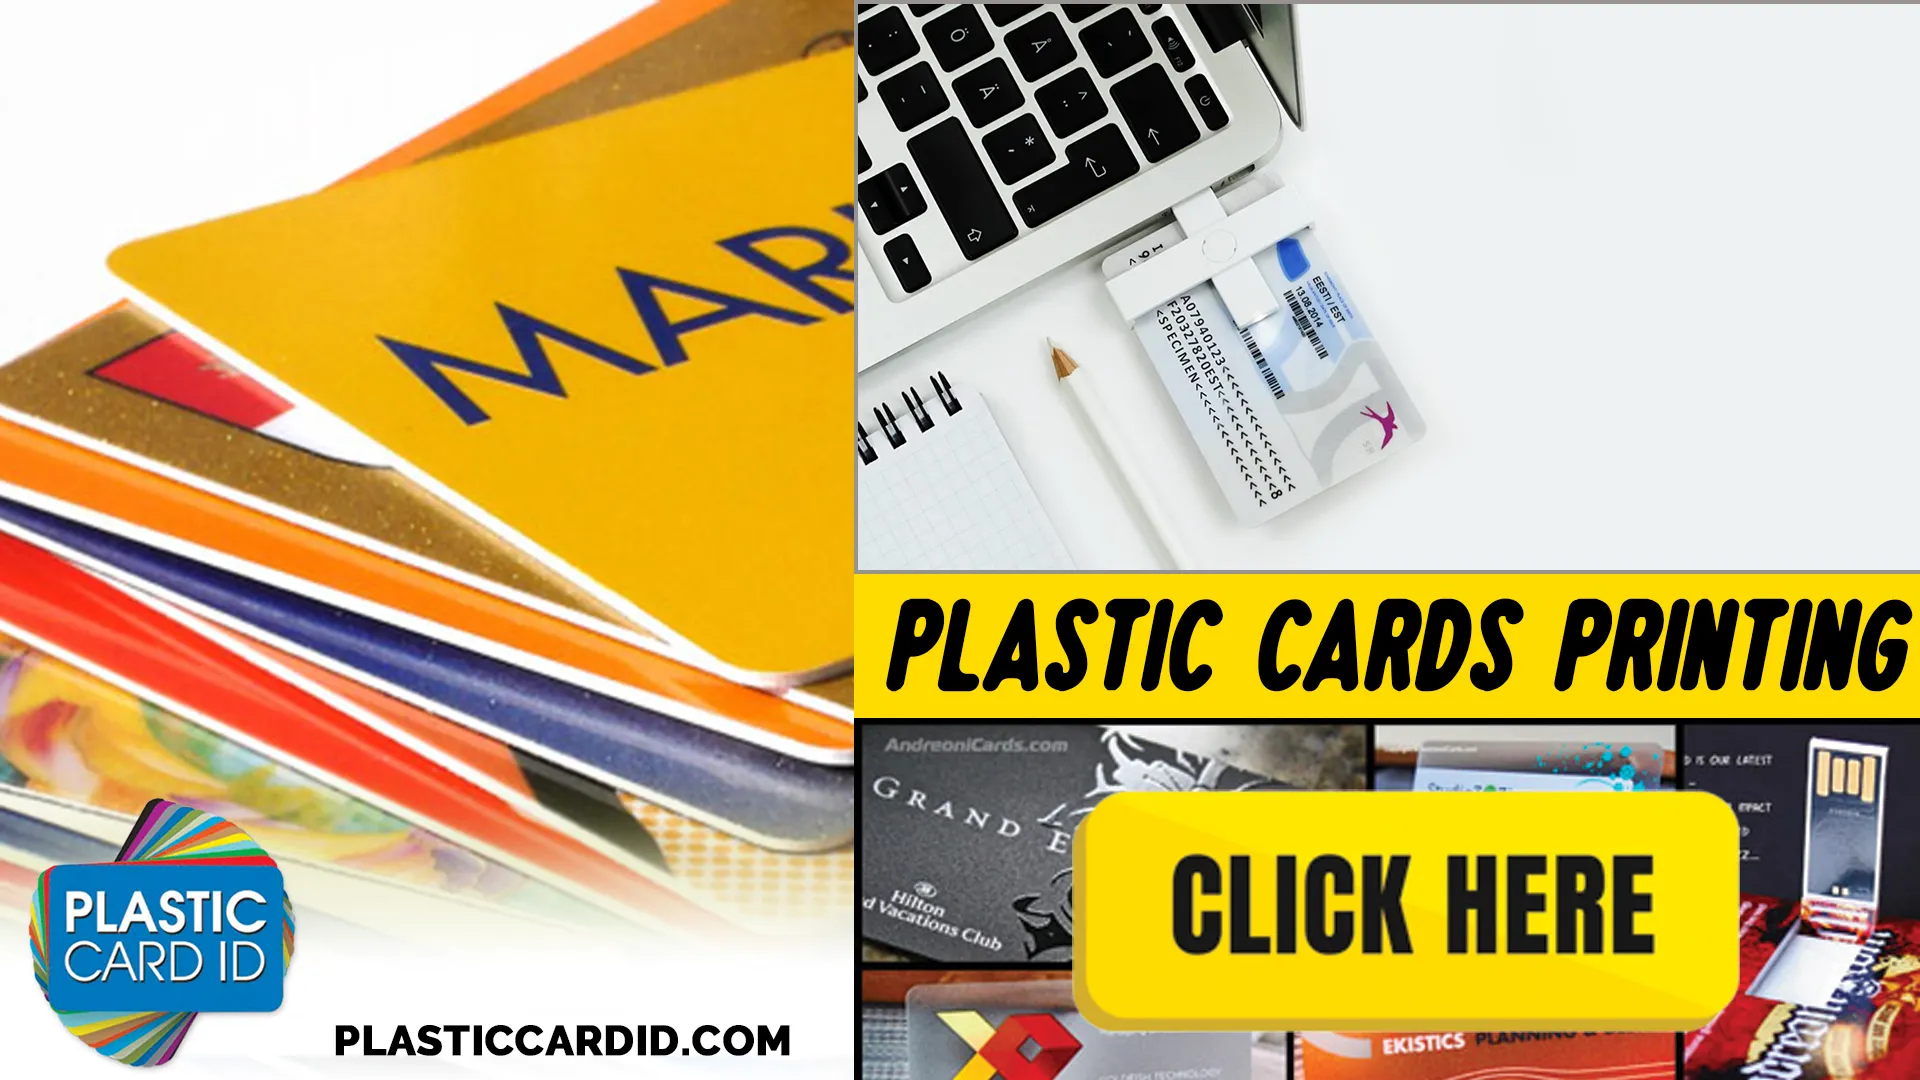 Welcome to Plastic Card ID




, Your Trusted Partner in Plastic Card Printing Solutions